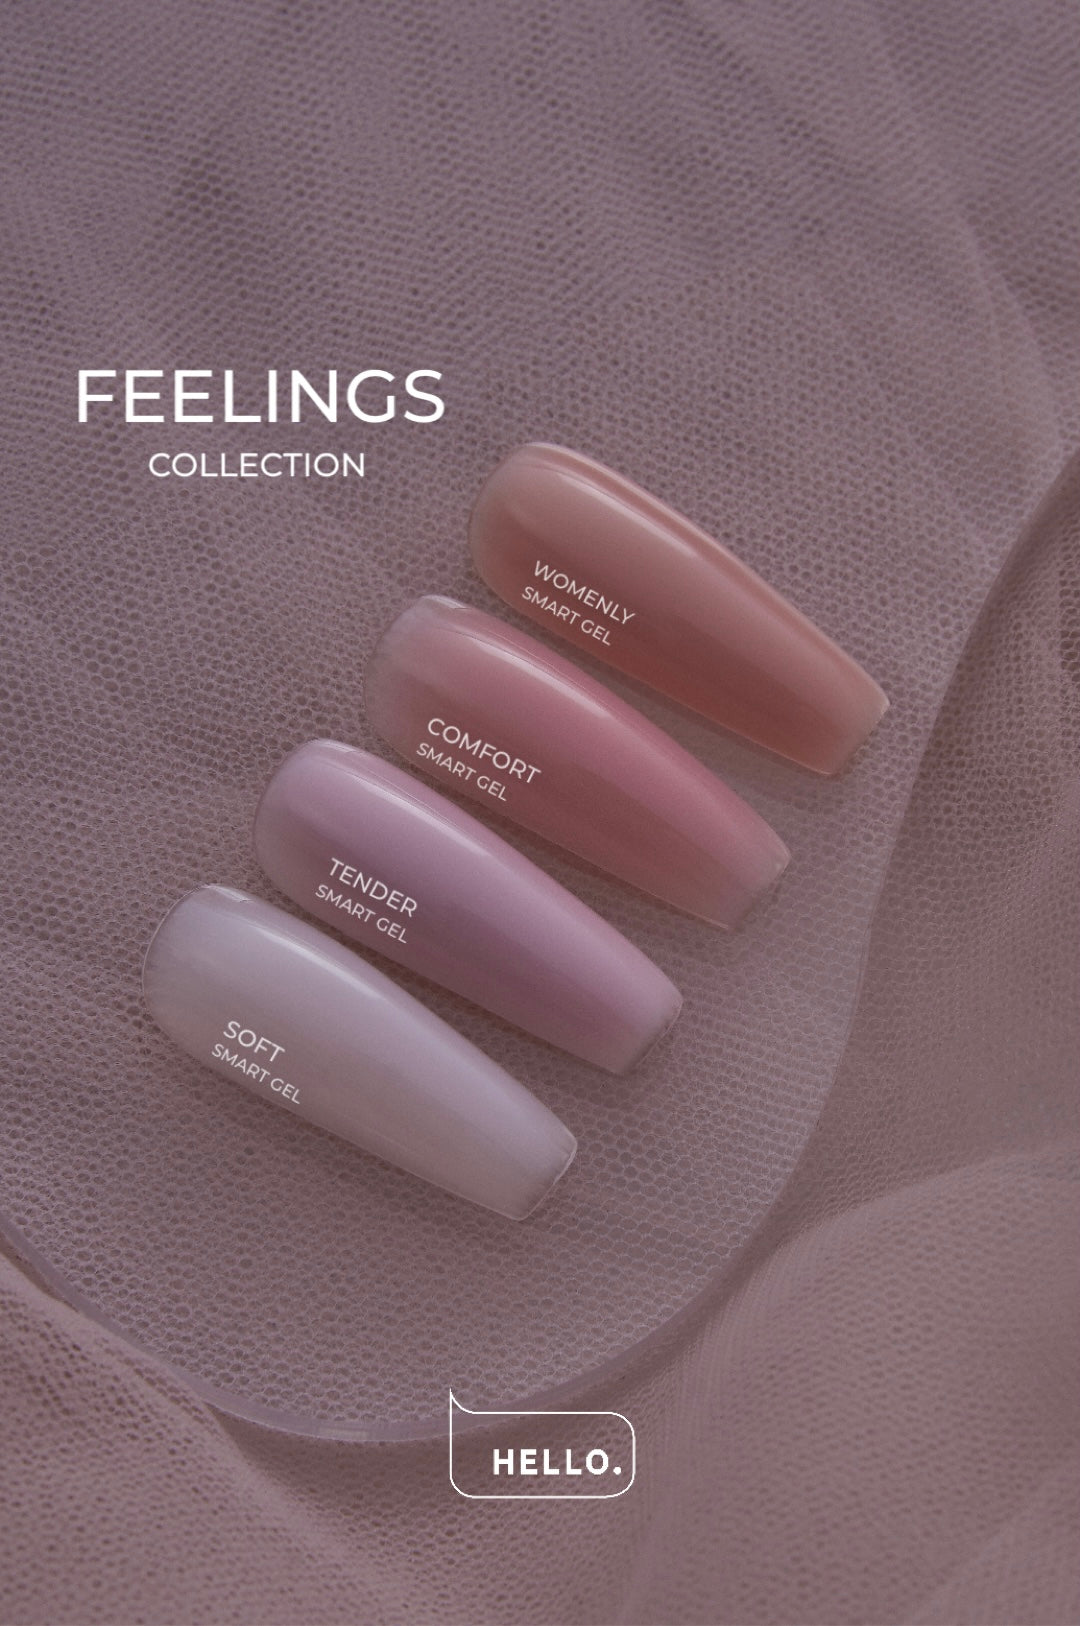 Feelings Collection part 1